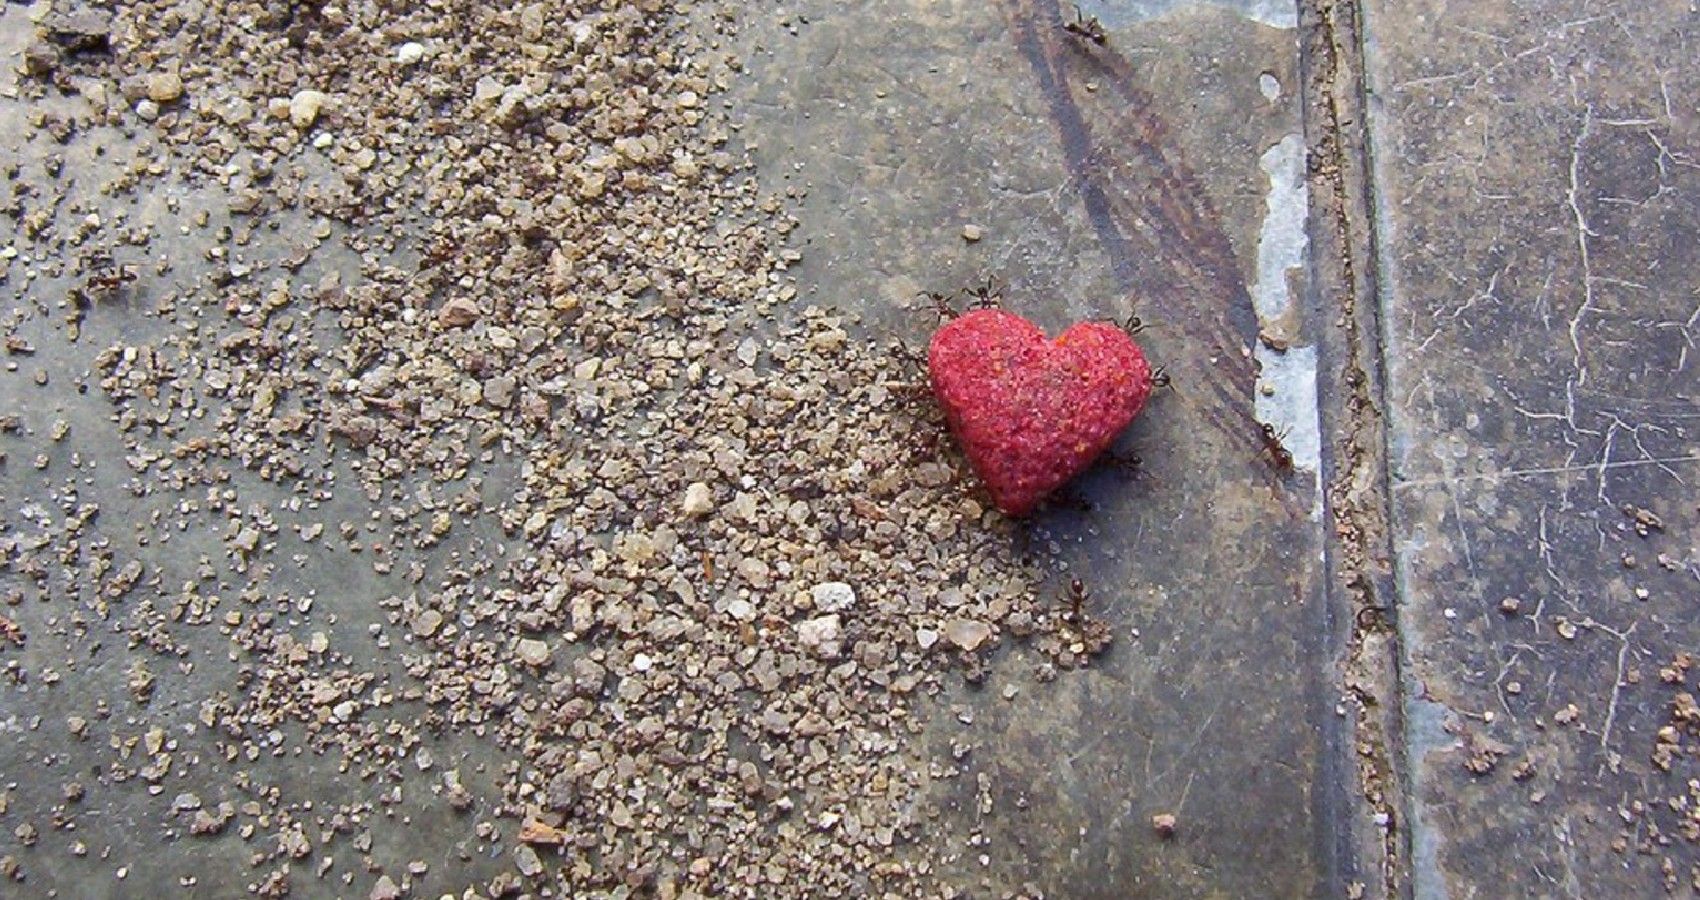 A small red heart on the sidewalk